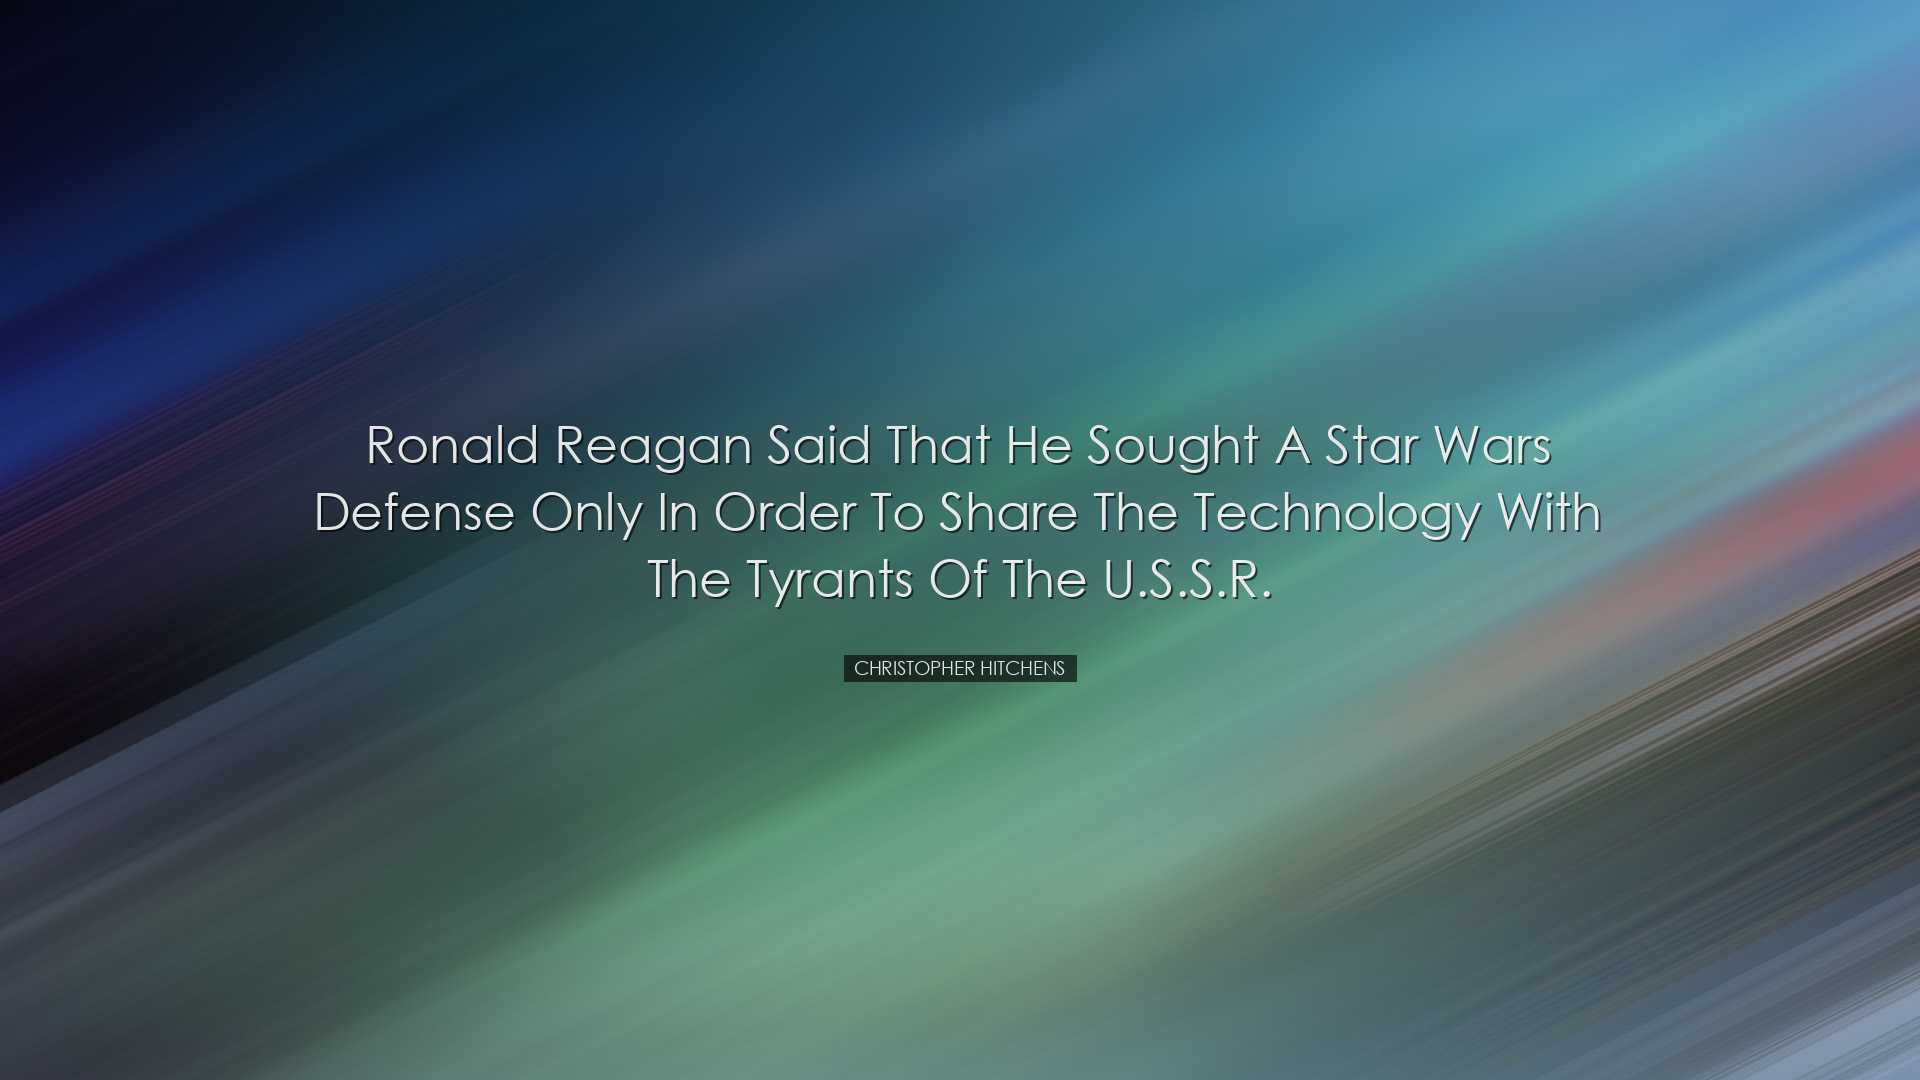 Ronald Reagan said that he sought a Star Wars defense only in orde